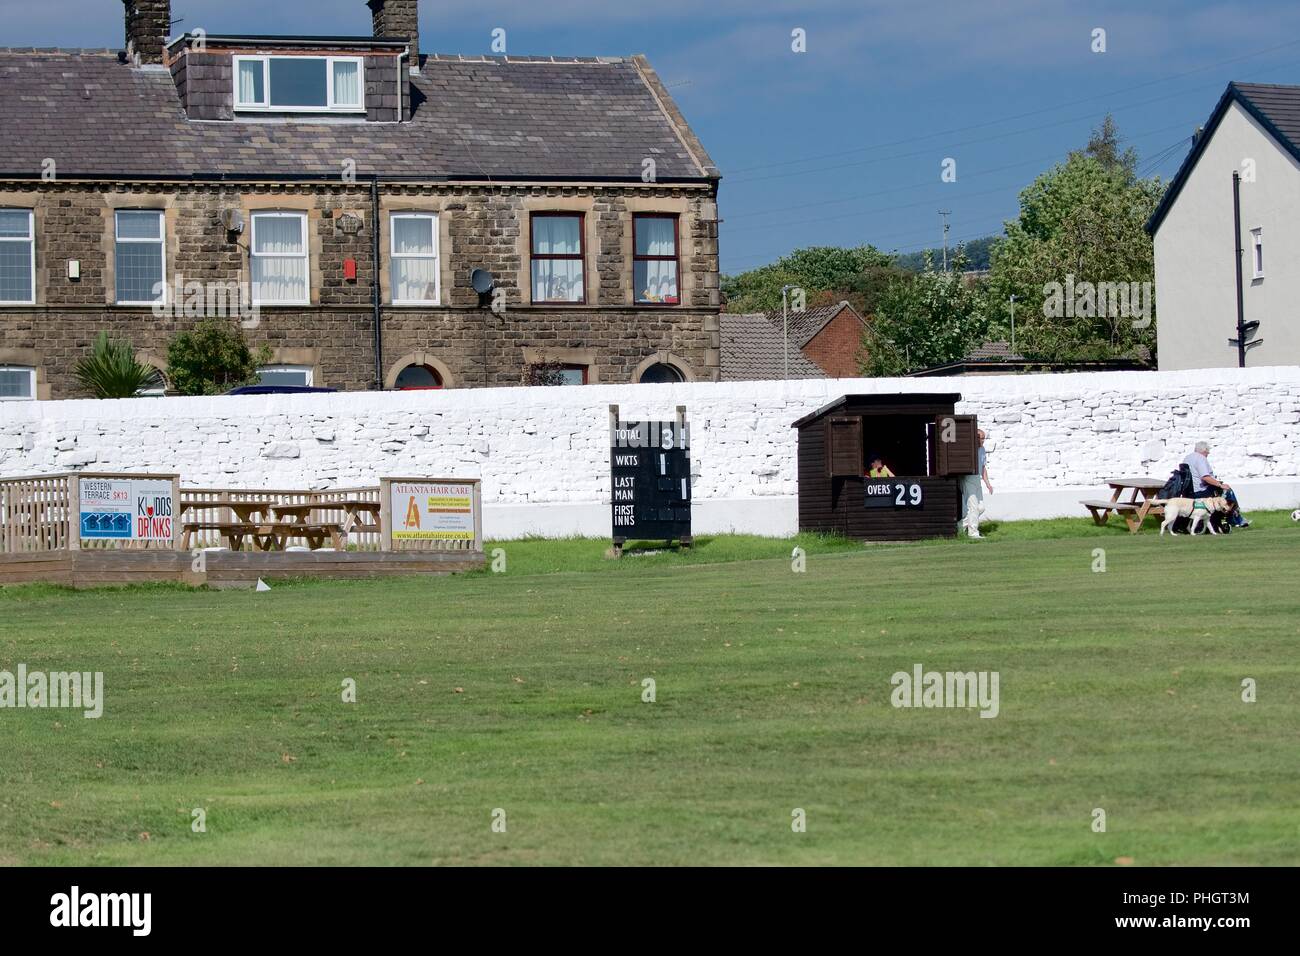 The score board in a second eleven match between Tintwistle and Mottram Stock Photo